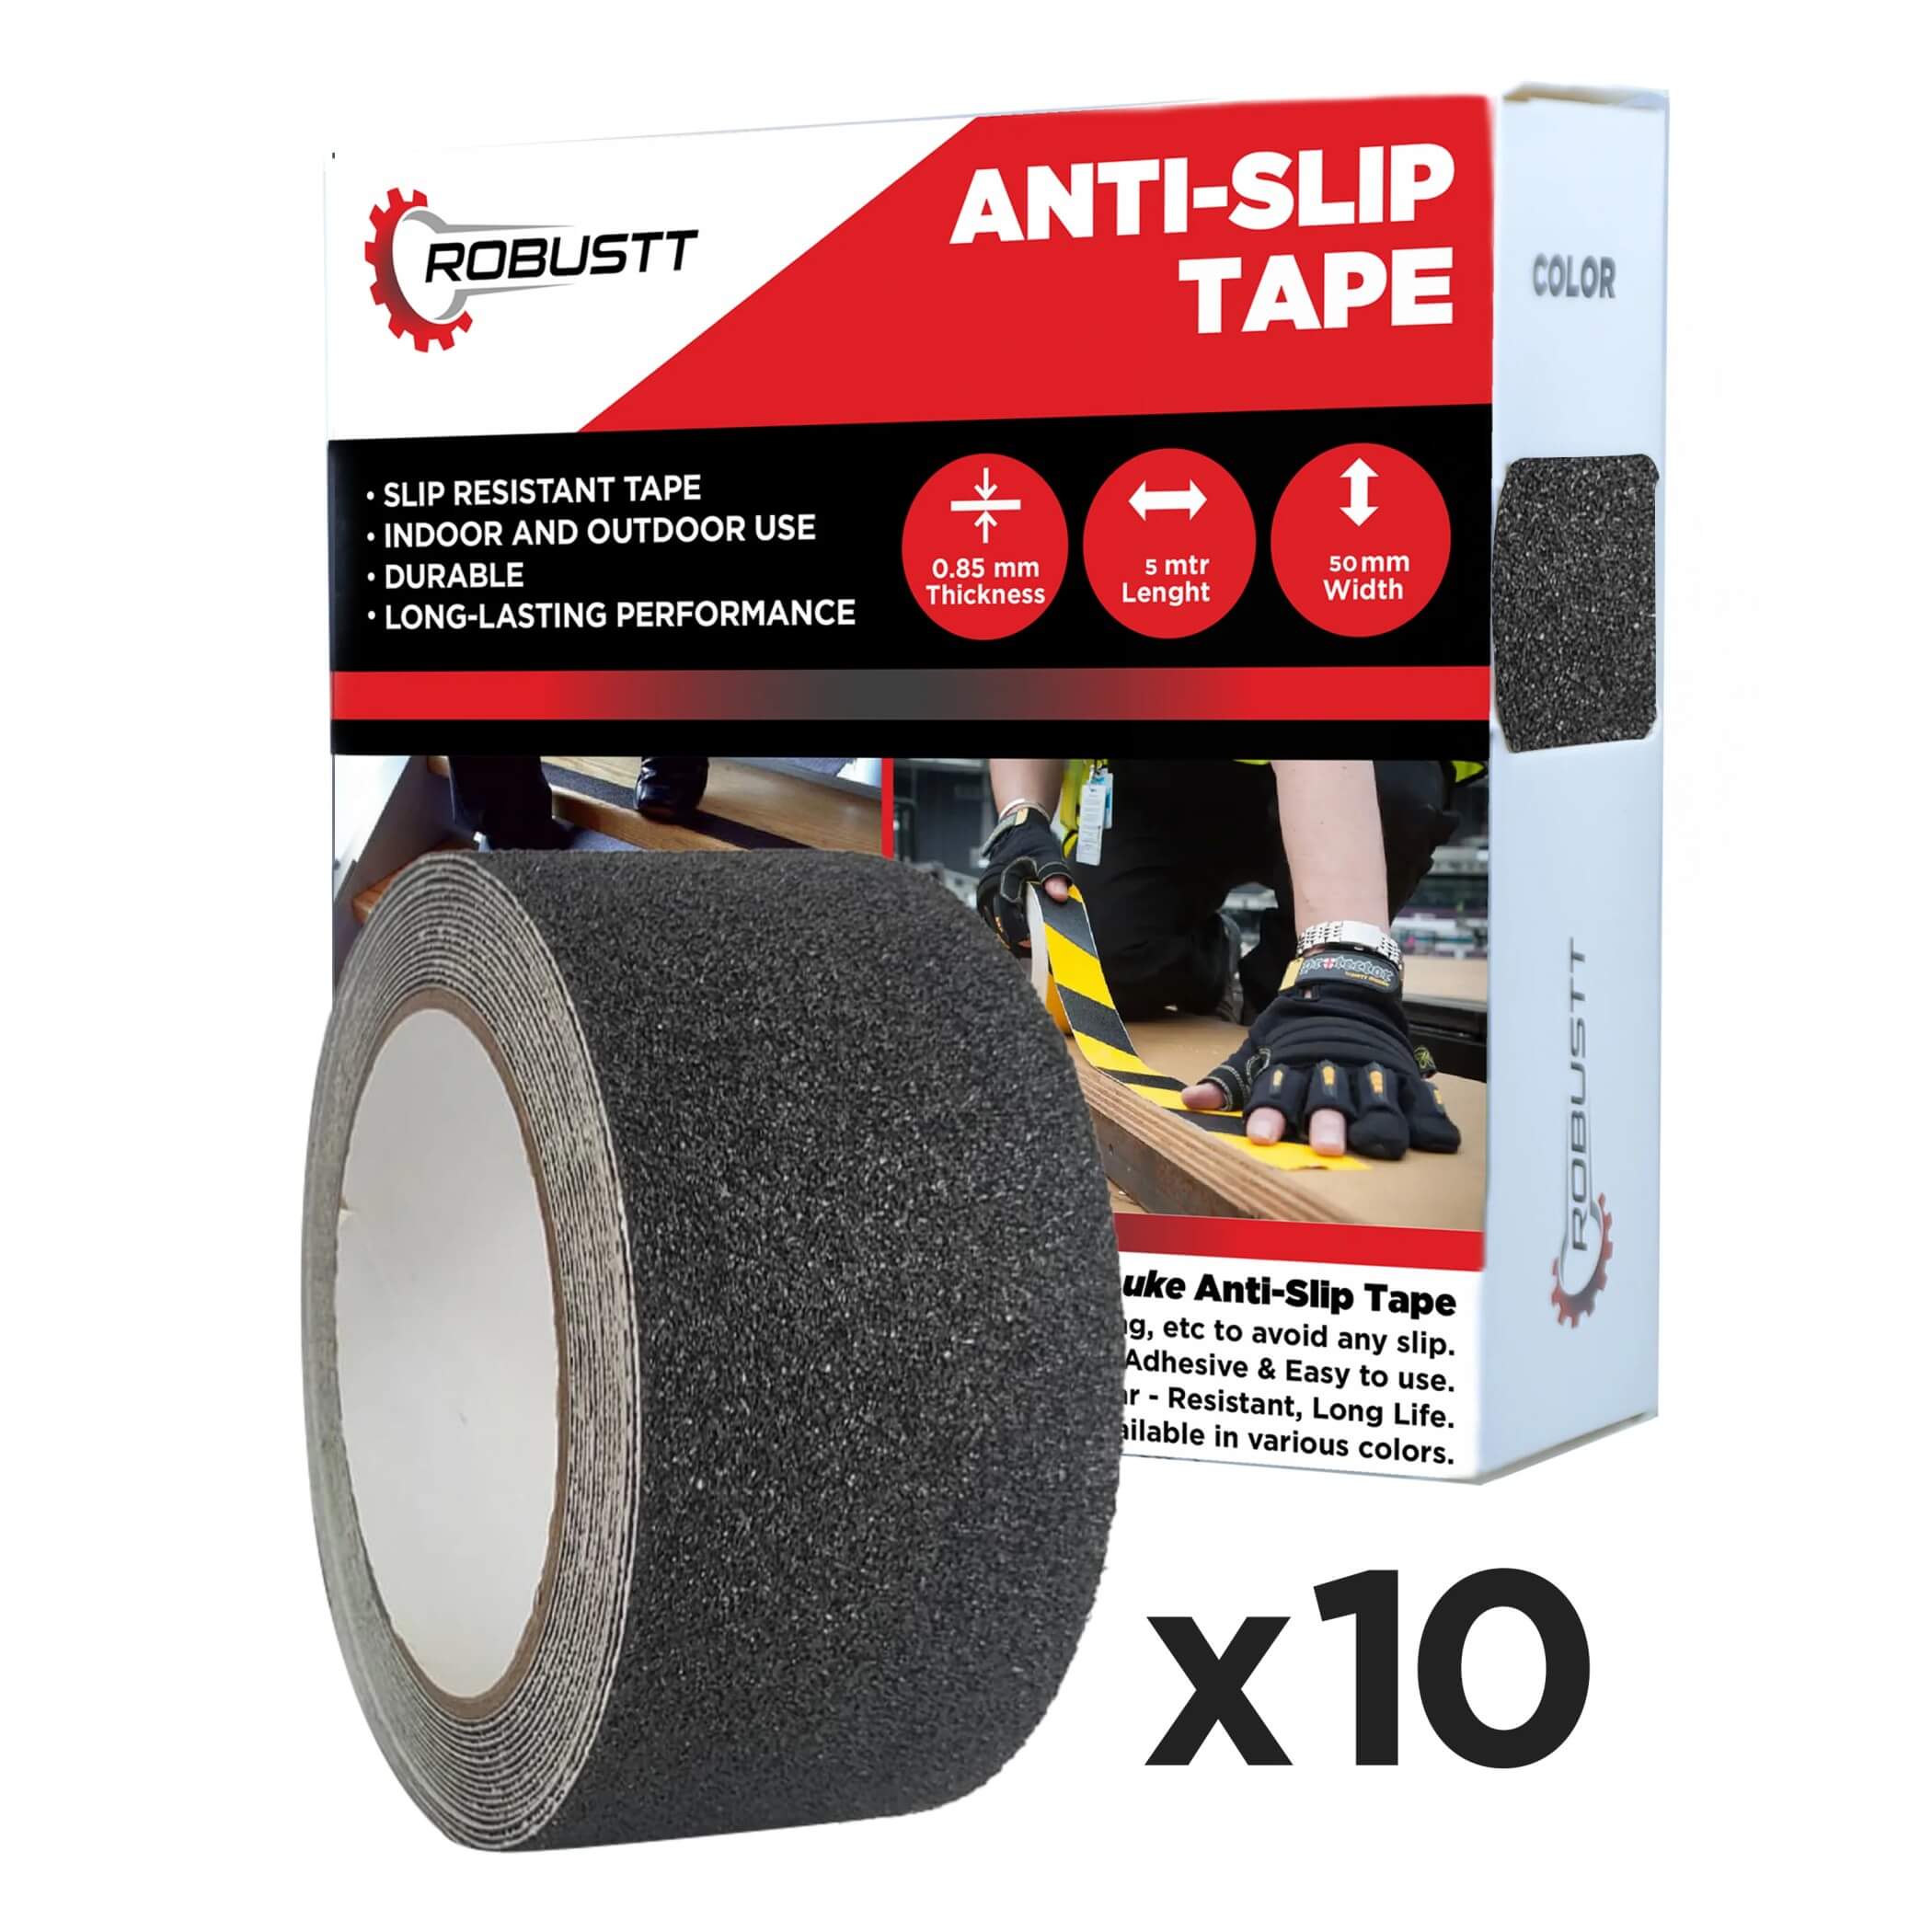 robustt-anti-skid-antislip-5mtr-guaranteed-x50mm-black-fall-resistant-with-pet-material-and-solvent-acrylic-adhesive-tape-pack-of-10